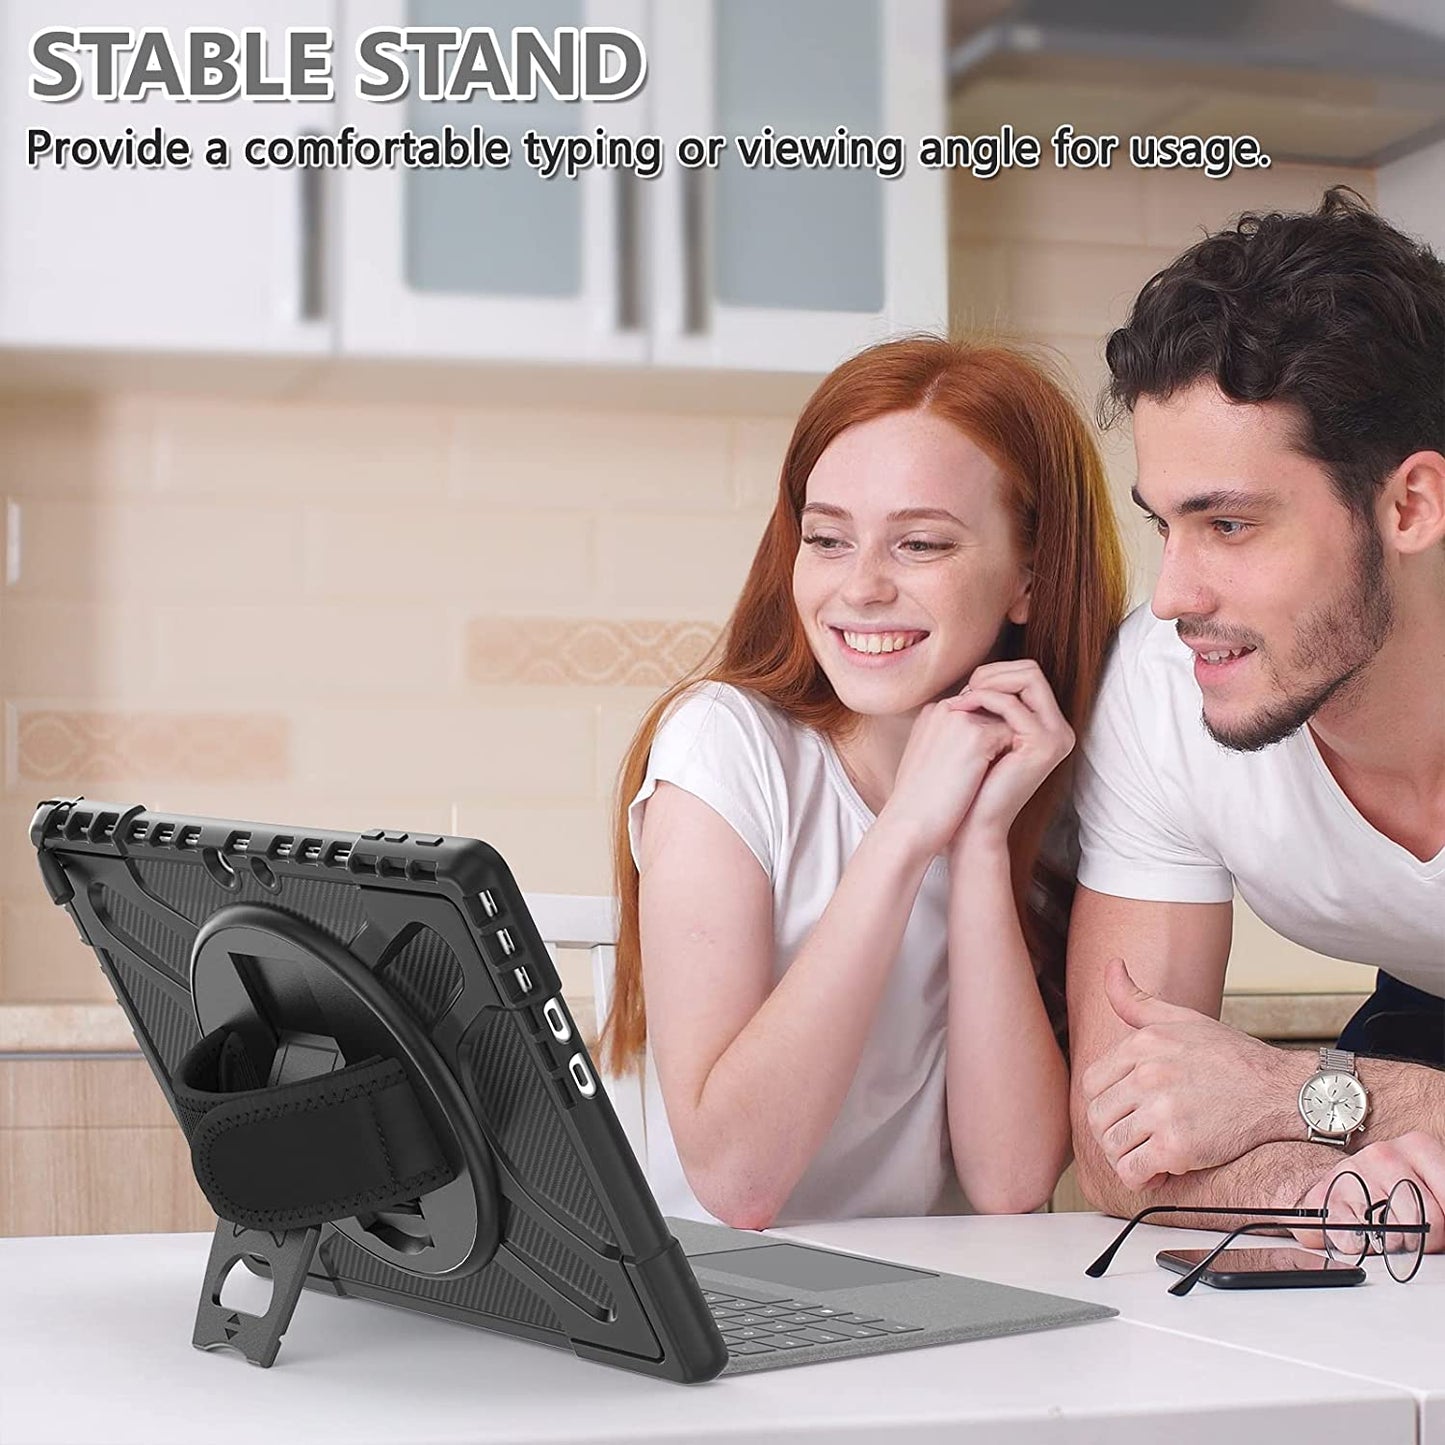 Yapears Surface Case for Pro 7 (2019) / Pro 6 (2018) / Pro 5 (2017) / Pro 4 (2015) with Pencil Holder, Stand, Hand Strap and Shoulder Belt for Surface 12.3 inch Tablet Heavy Duty Shockproof-Black